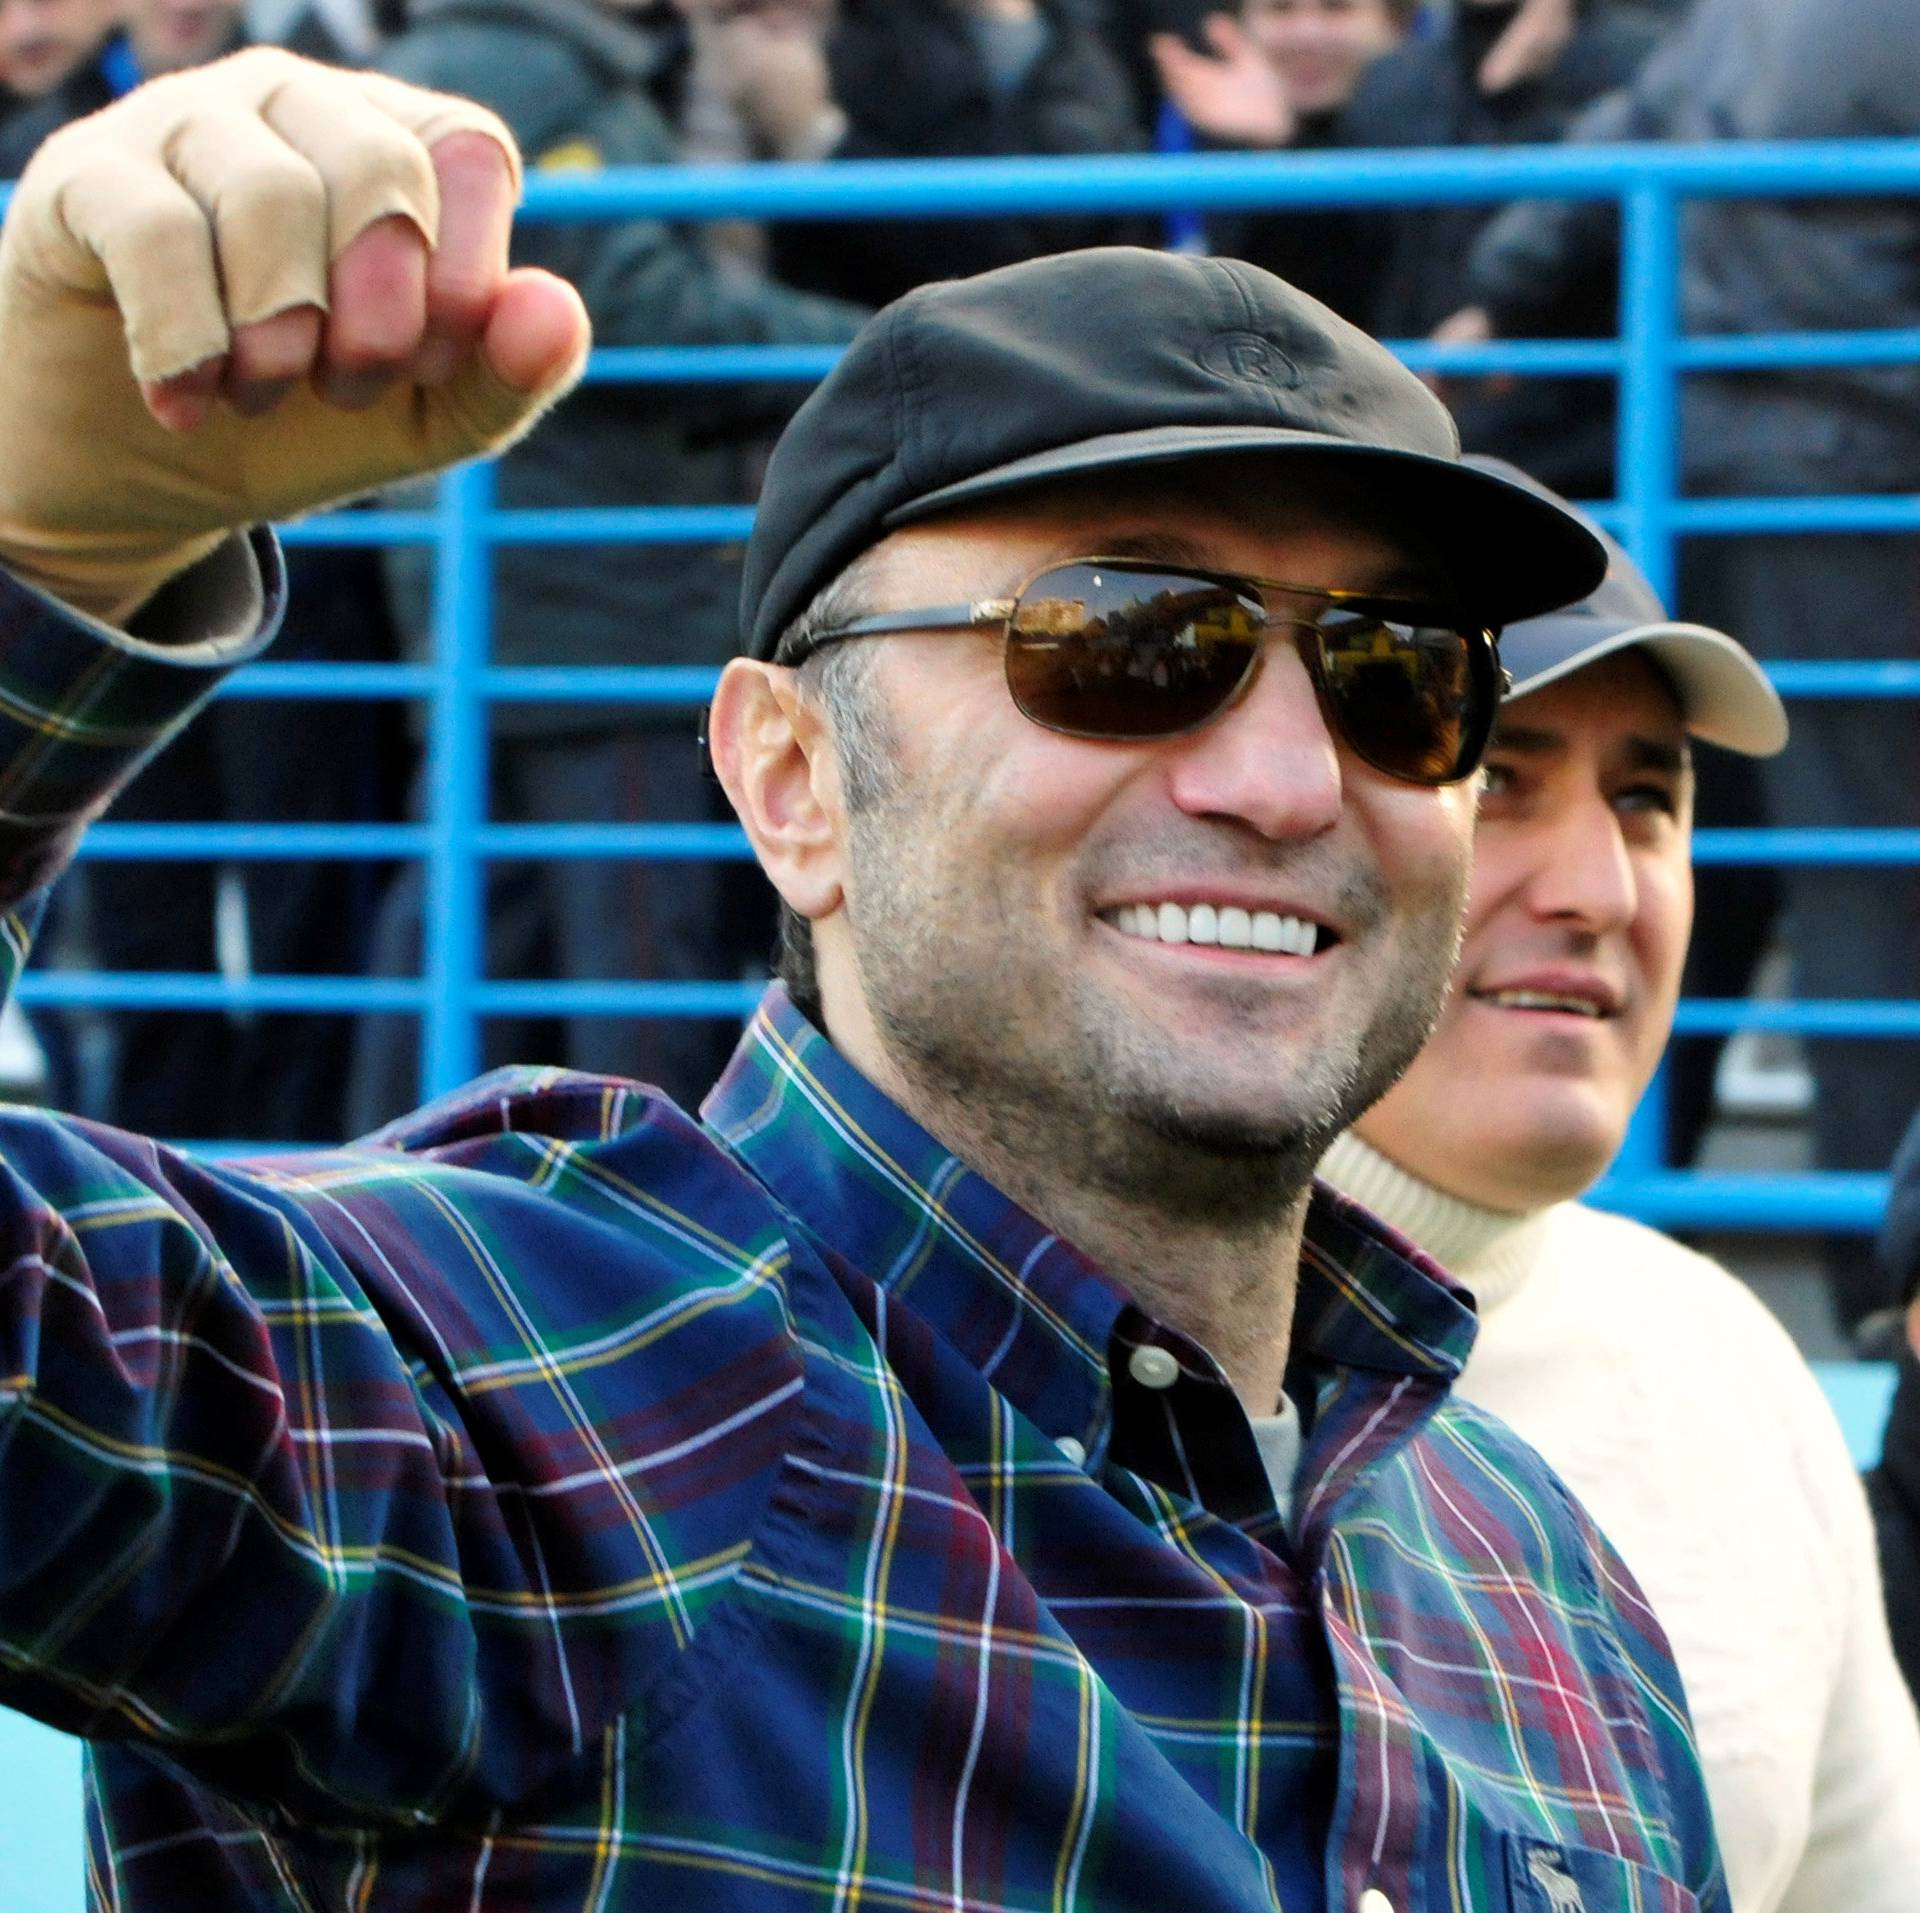 FILE PHOTO: Dagestani born tycoon Suleiman Kerimov watches a soccer match between Anzhi and CSKA in Makhachkala